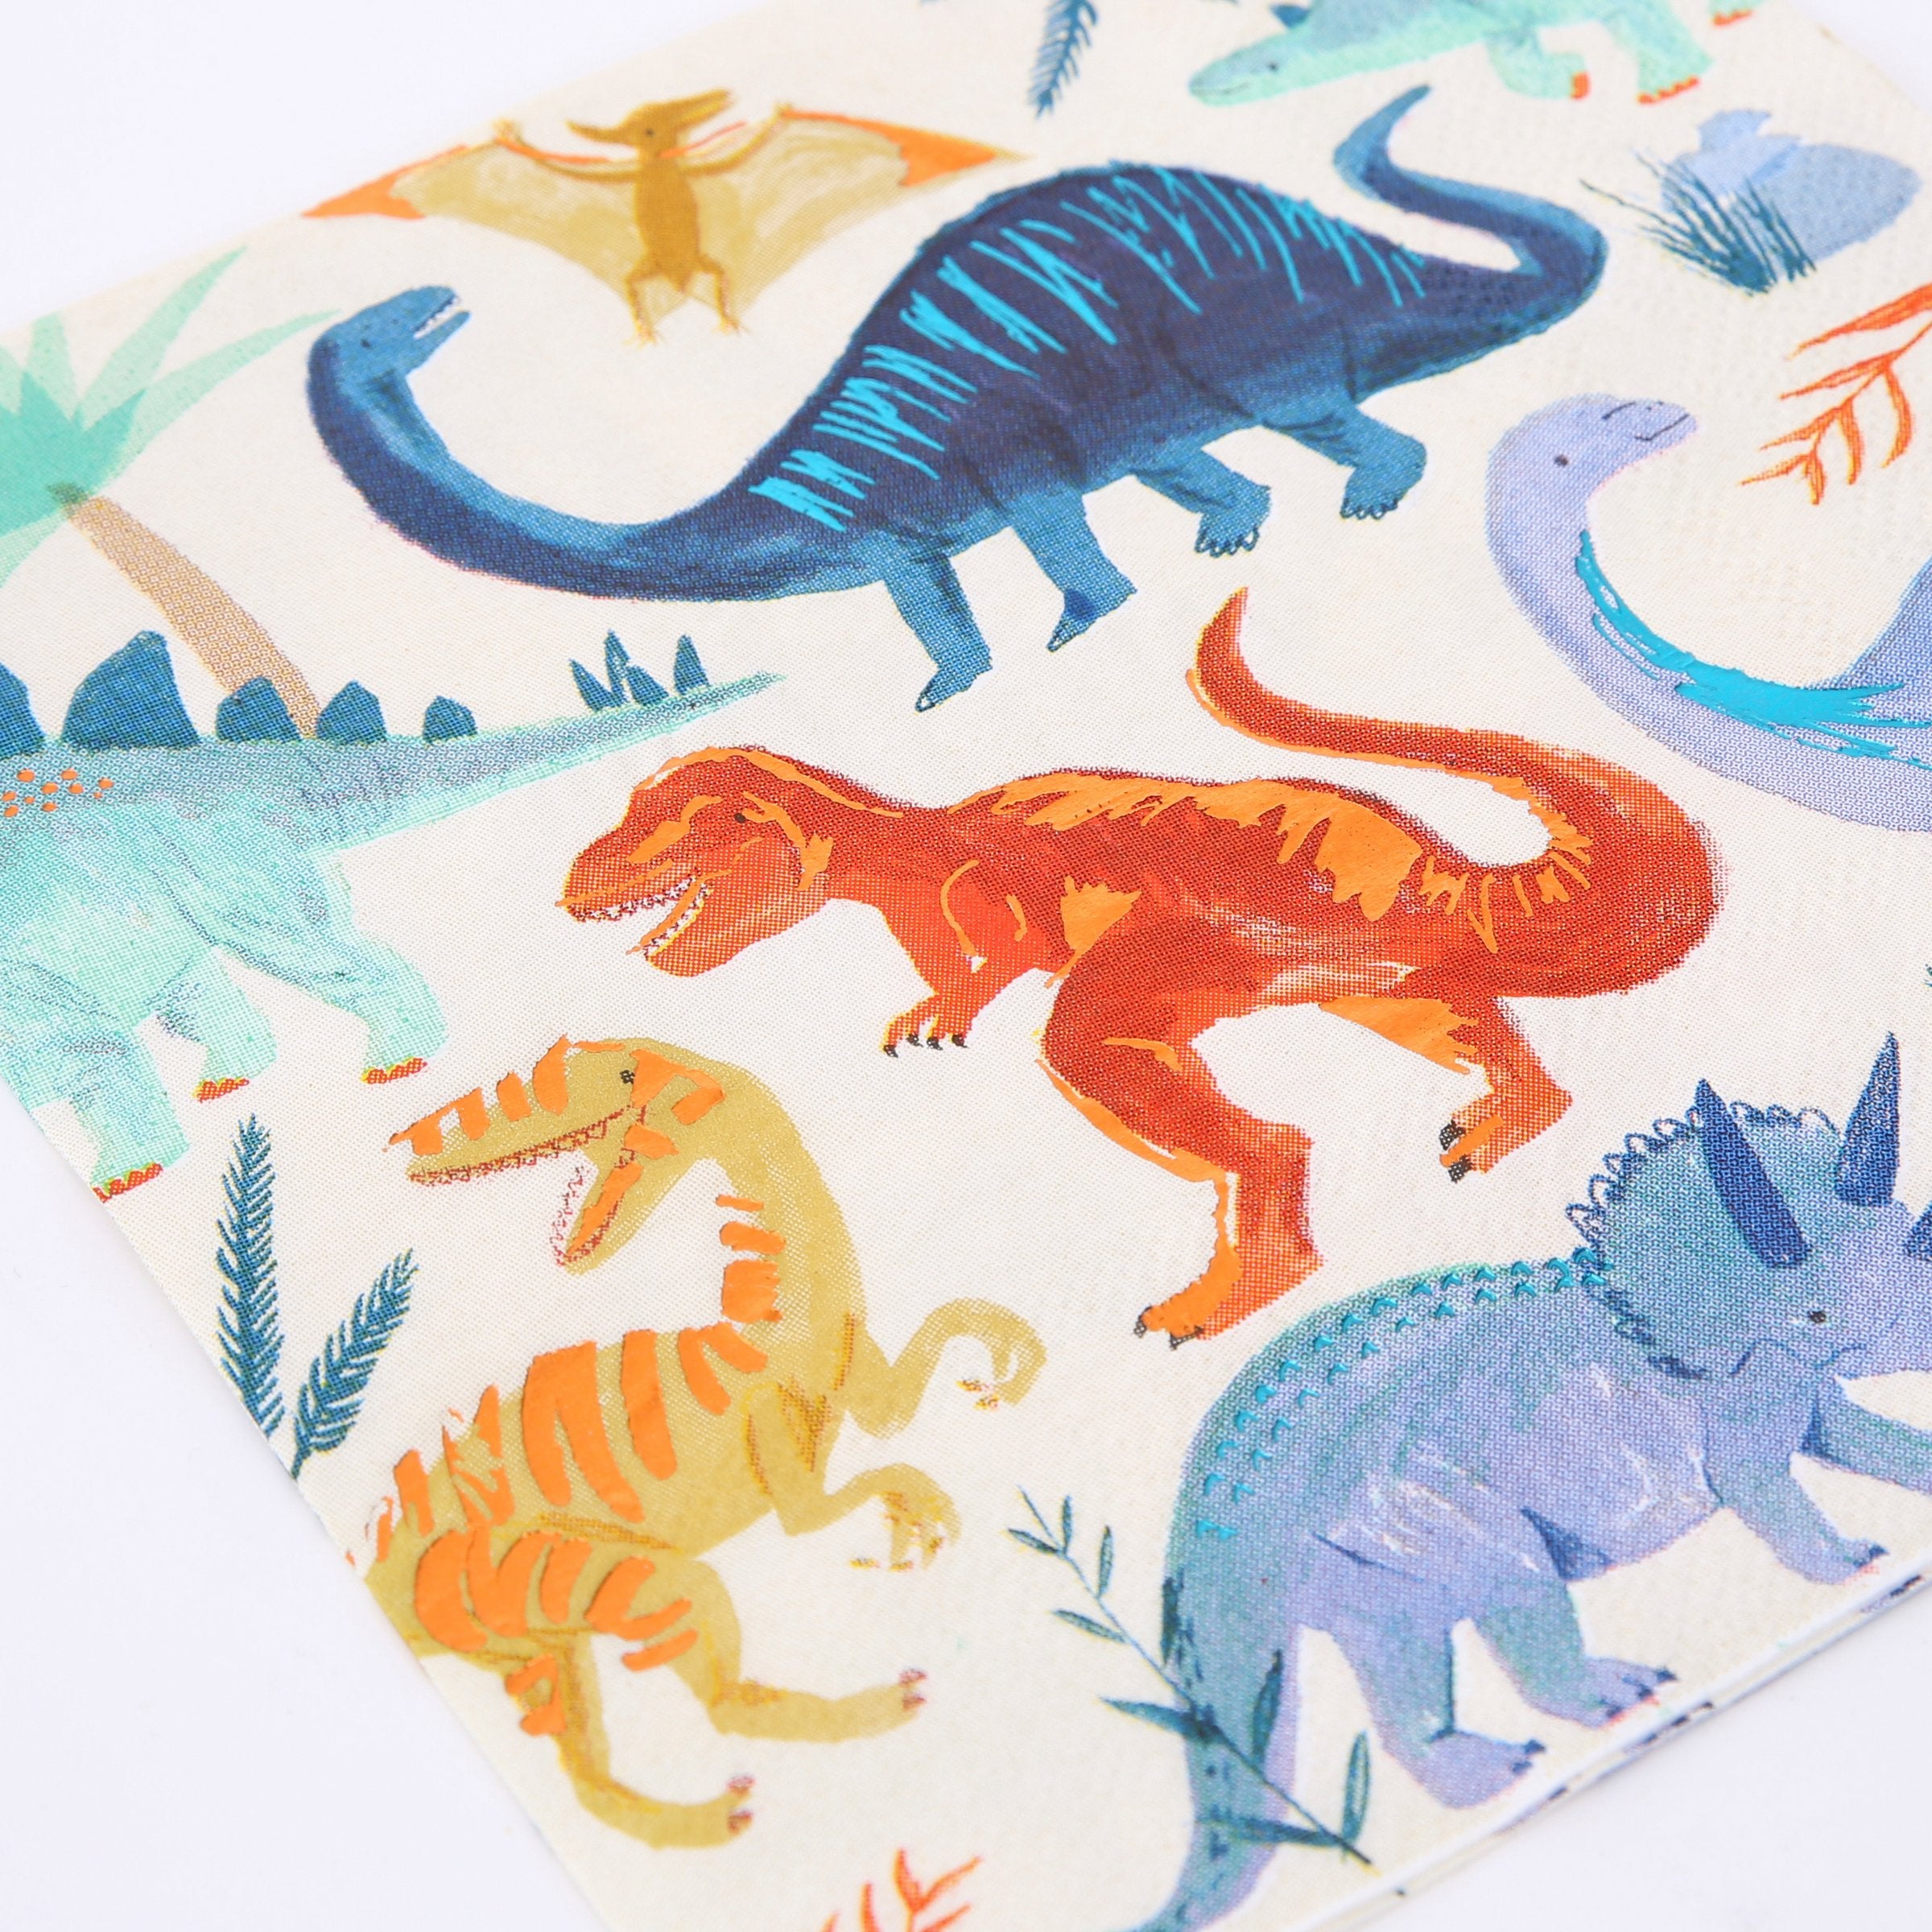 If you're looking for dinosaur party decoration ideas, then you'll our colorful dinosaur paper napkins.